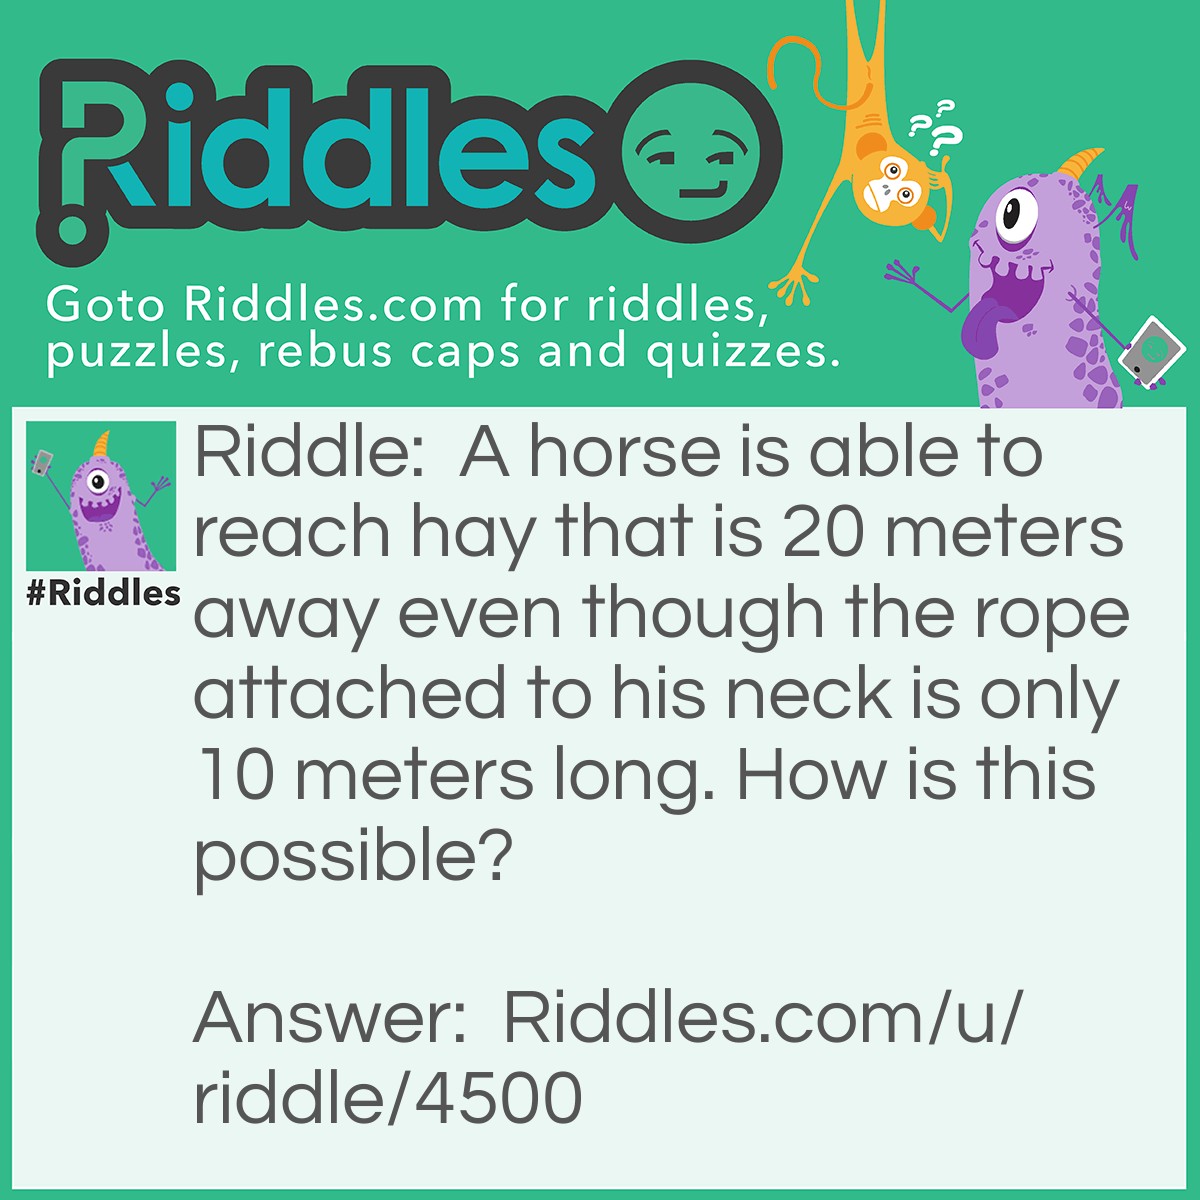 Riddle: A horse is able to reach hay that is 20 meters away even though the rope attached to his neck is only 10 meters long. How is this possible? Answer: The other end of the rope isn't attached to a fence or anything.